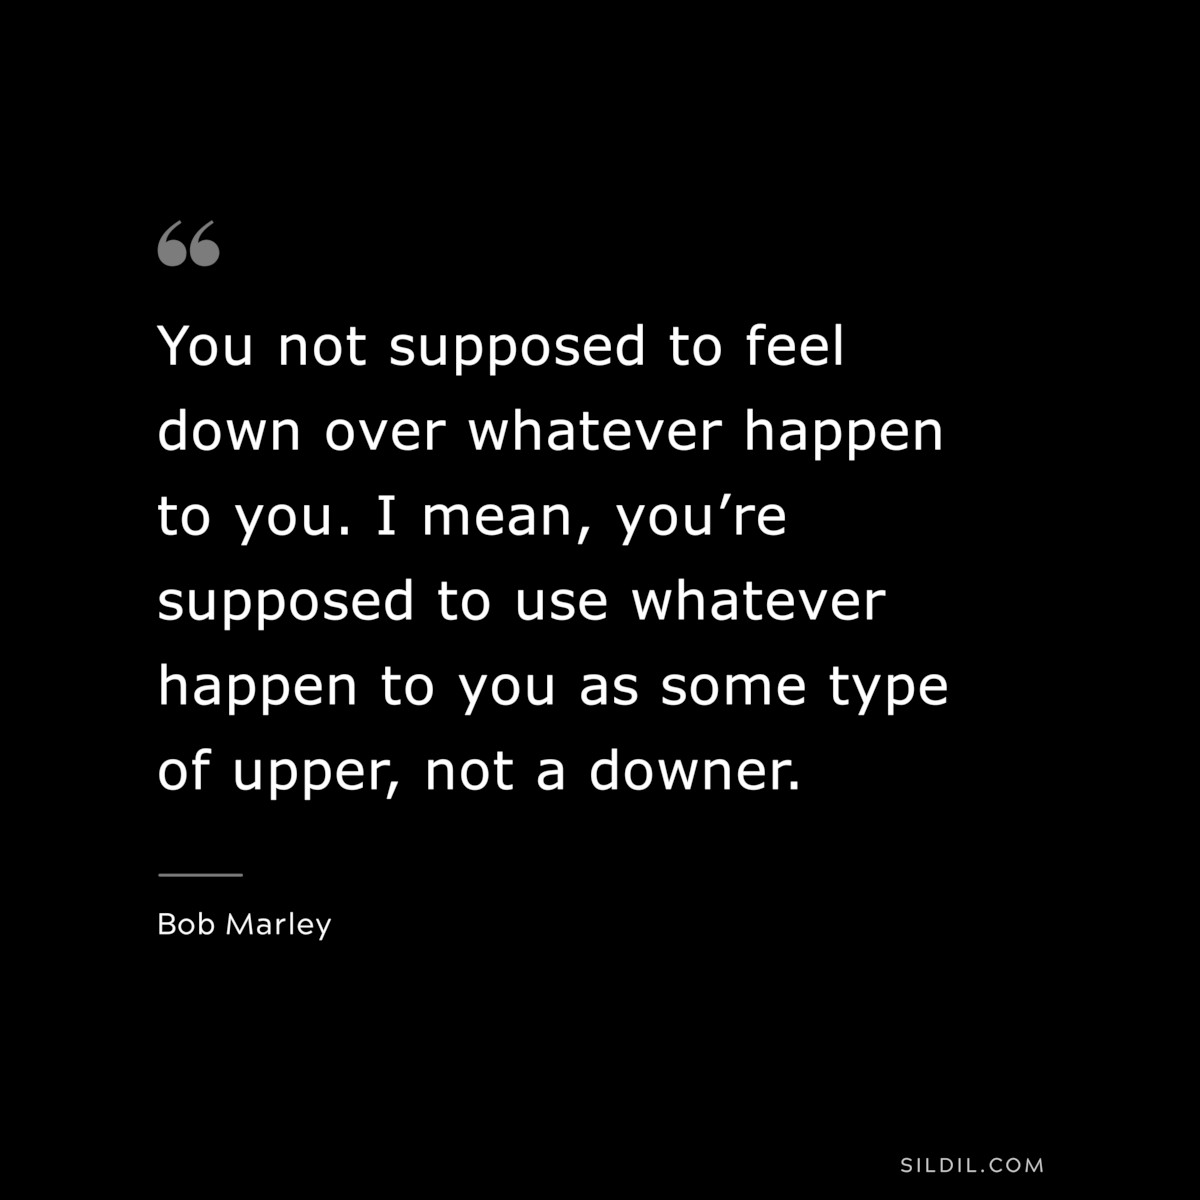 You not supposed to feel down over whatever happen to you. I mean, you’re supposed to use whatever happen to you as some type of upper, not a downer. ― Bob Marley